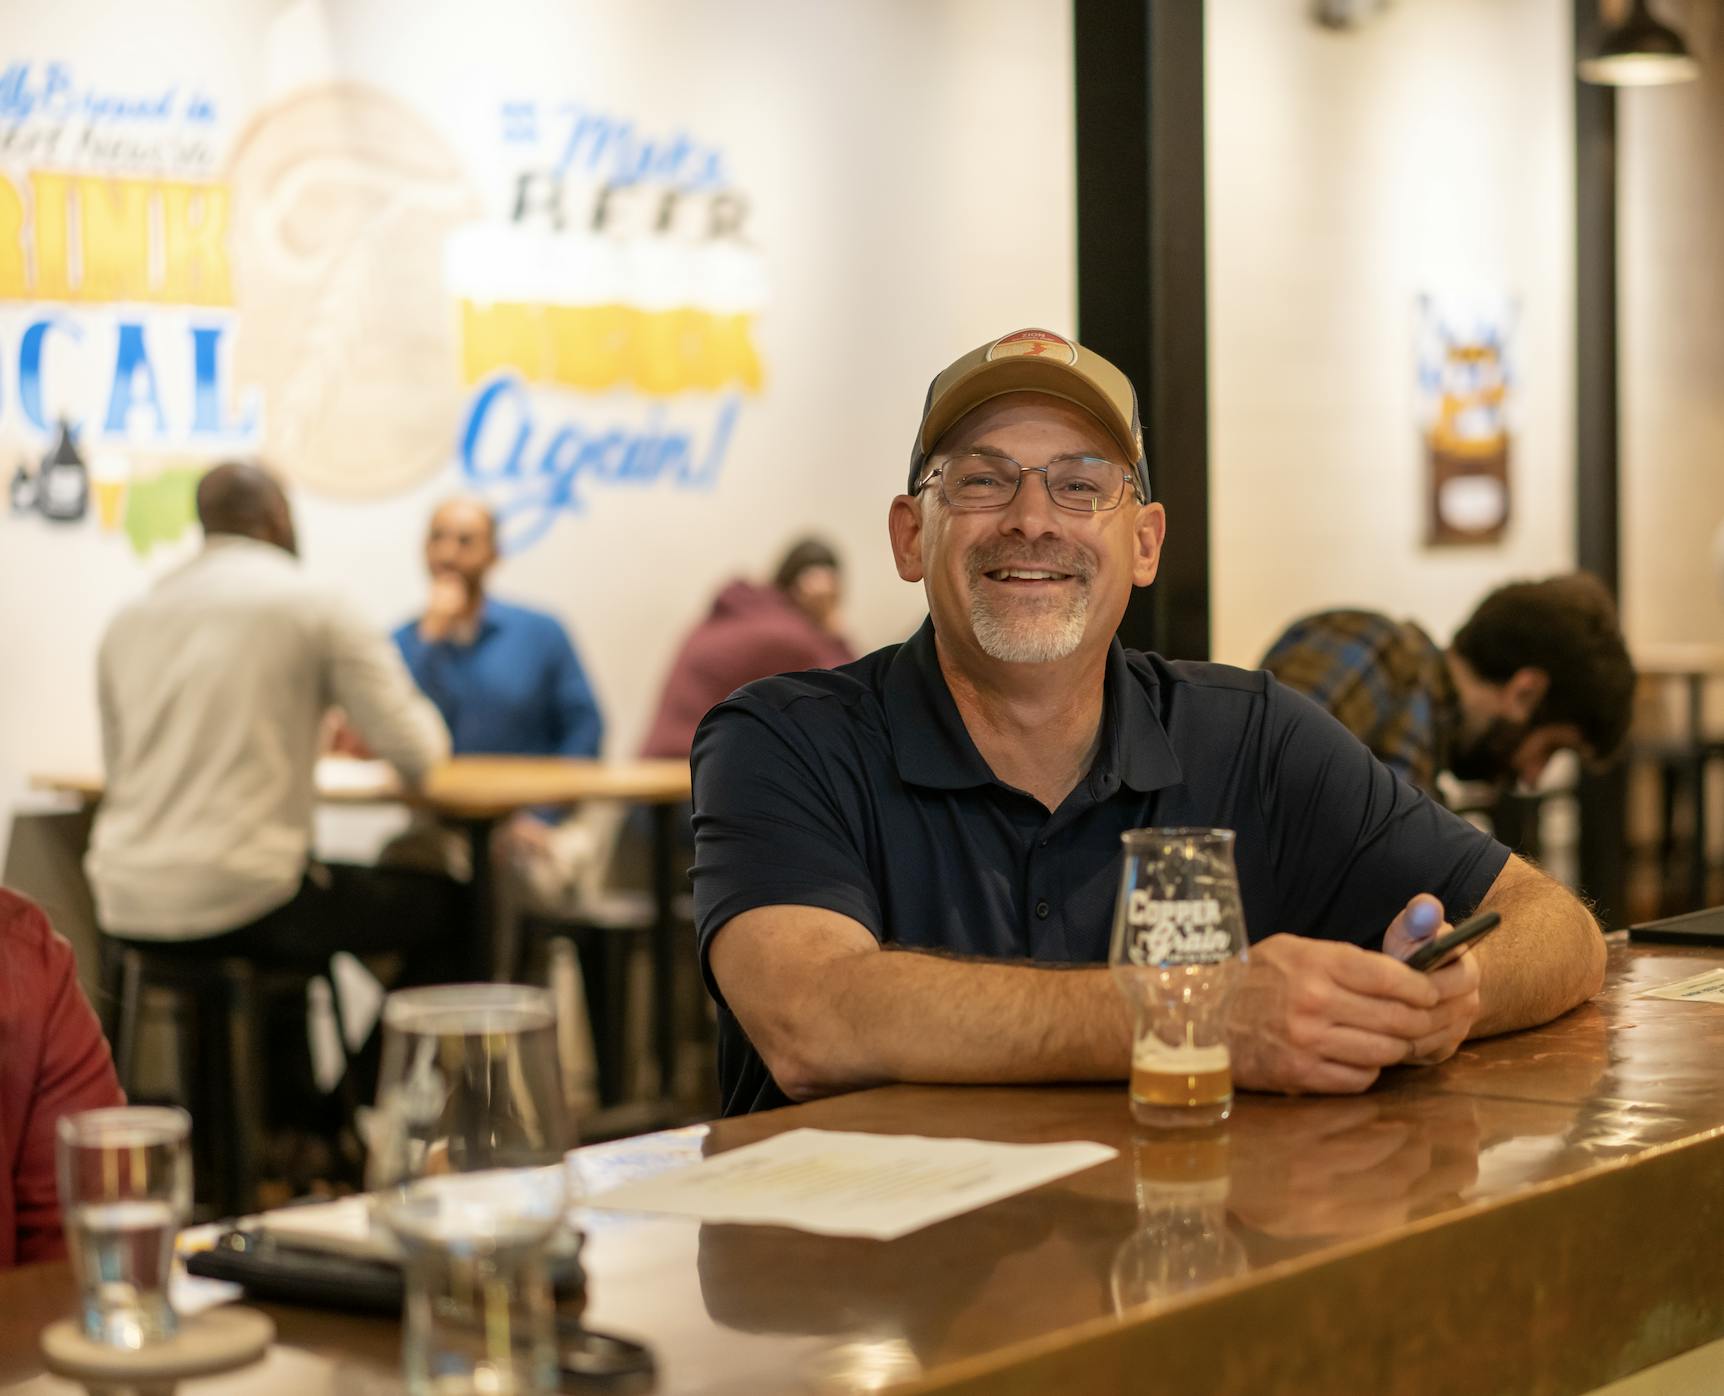 Customer smiling while sitting at the bar having a beer.